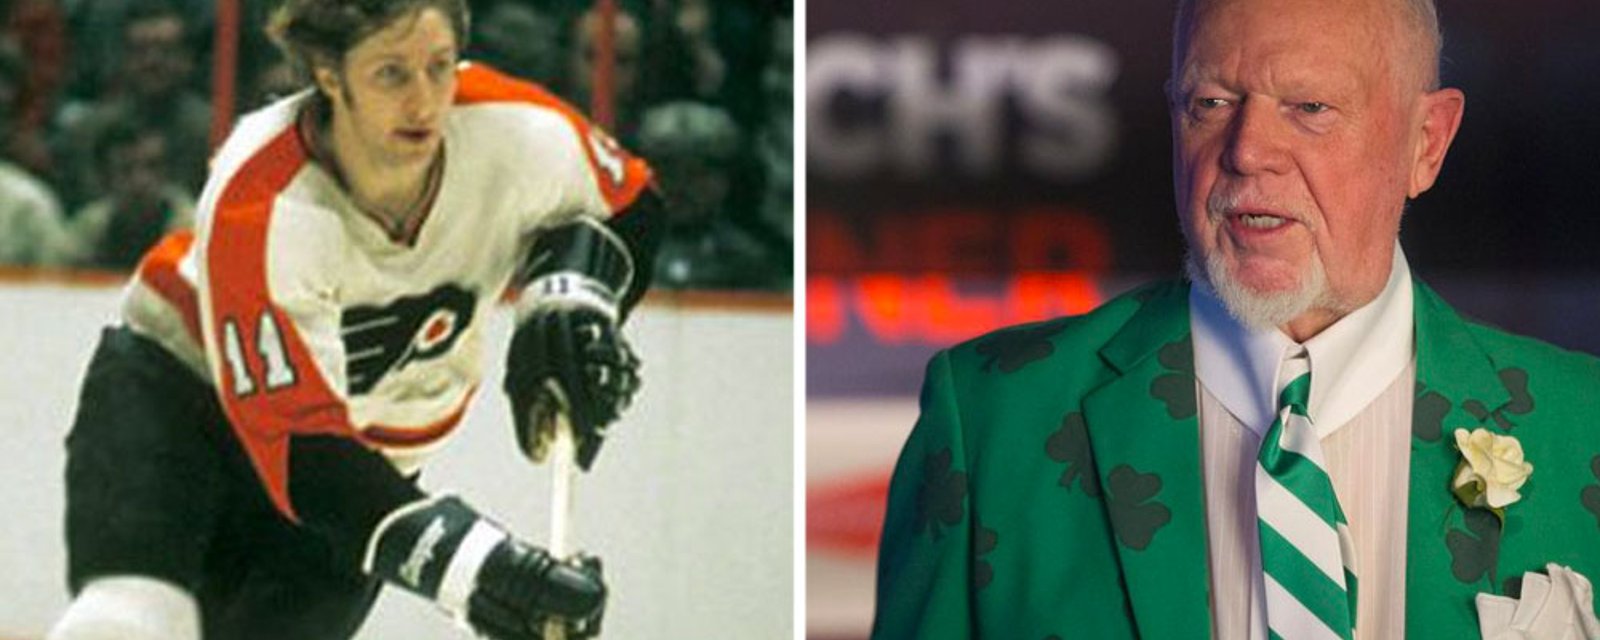 Former NHLer Don Saleski rips Don Cherry, calls him out for abusive coaching tactics